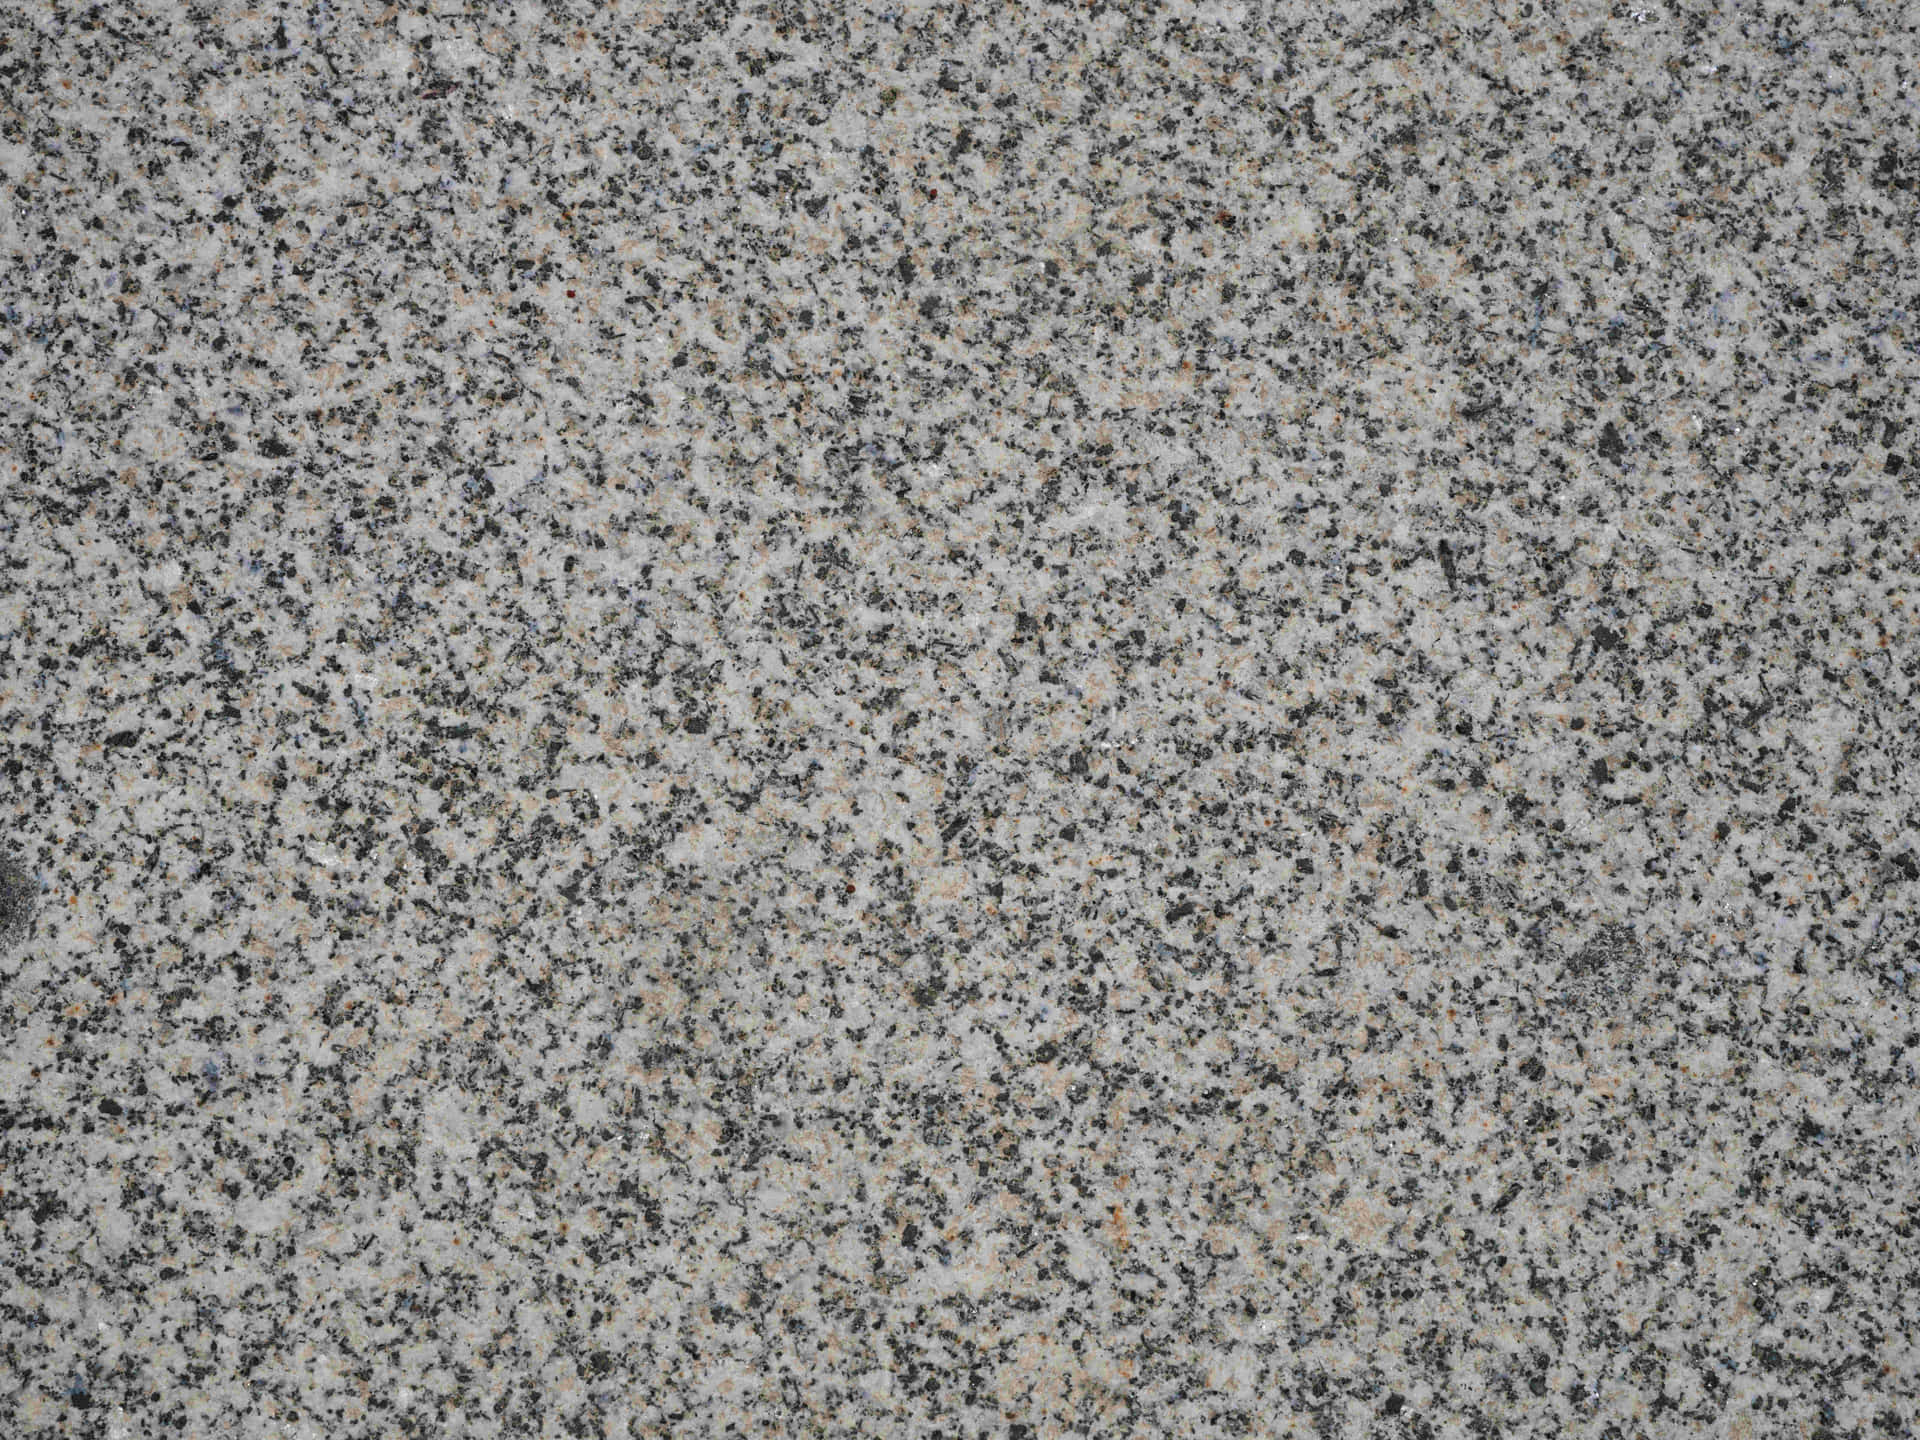 Enhance your home décor with the Beauty of Granite